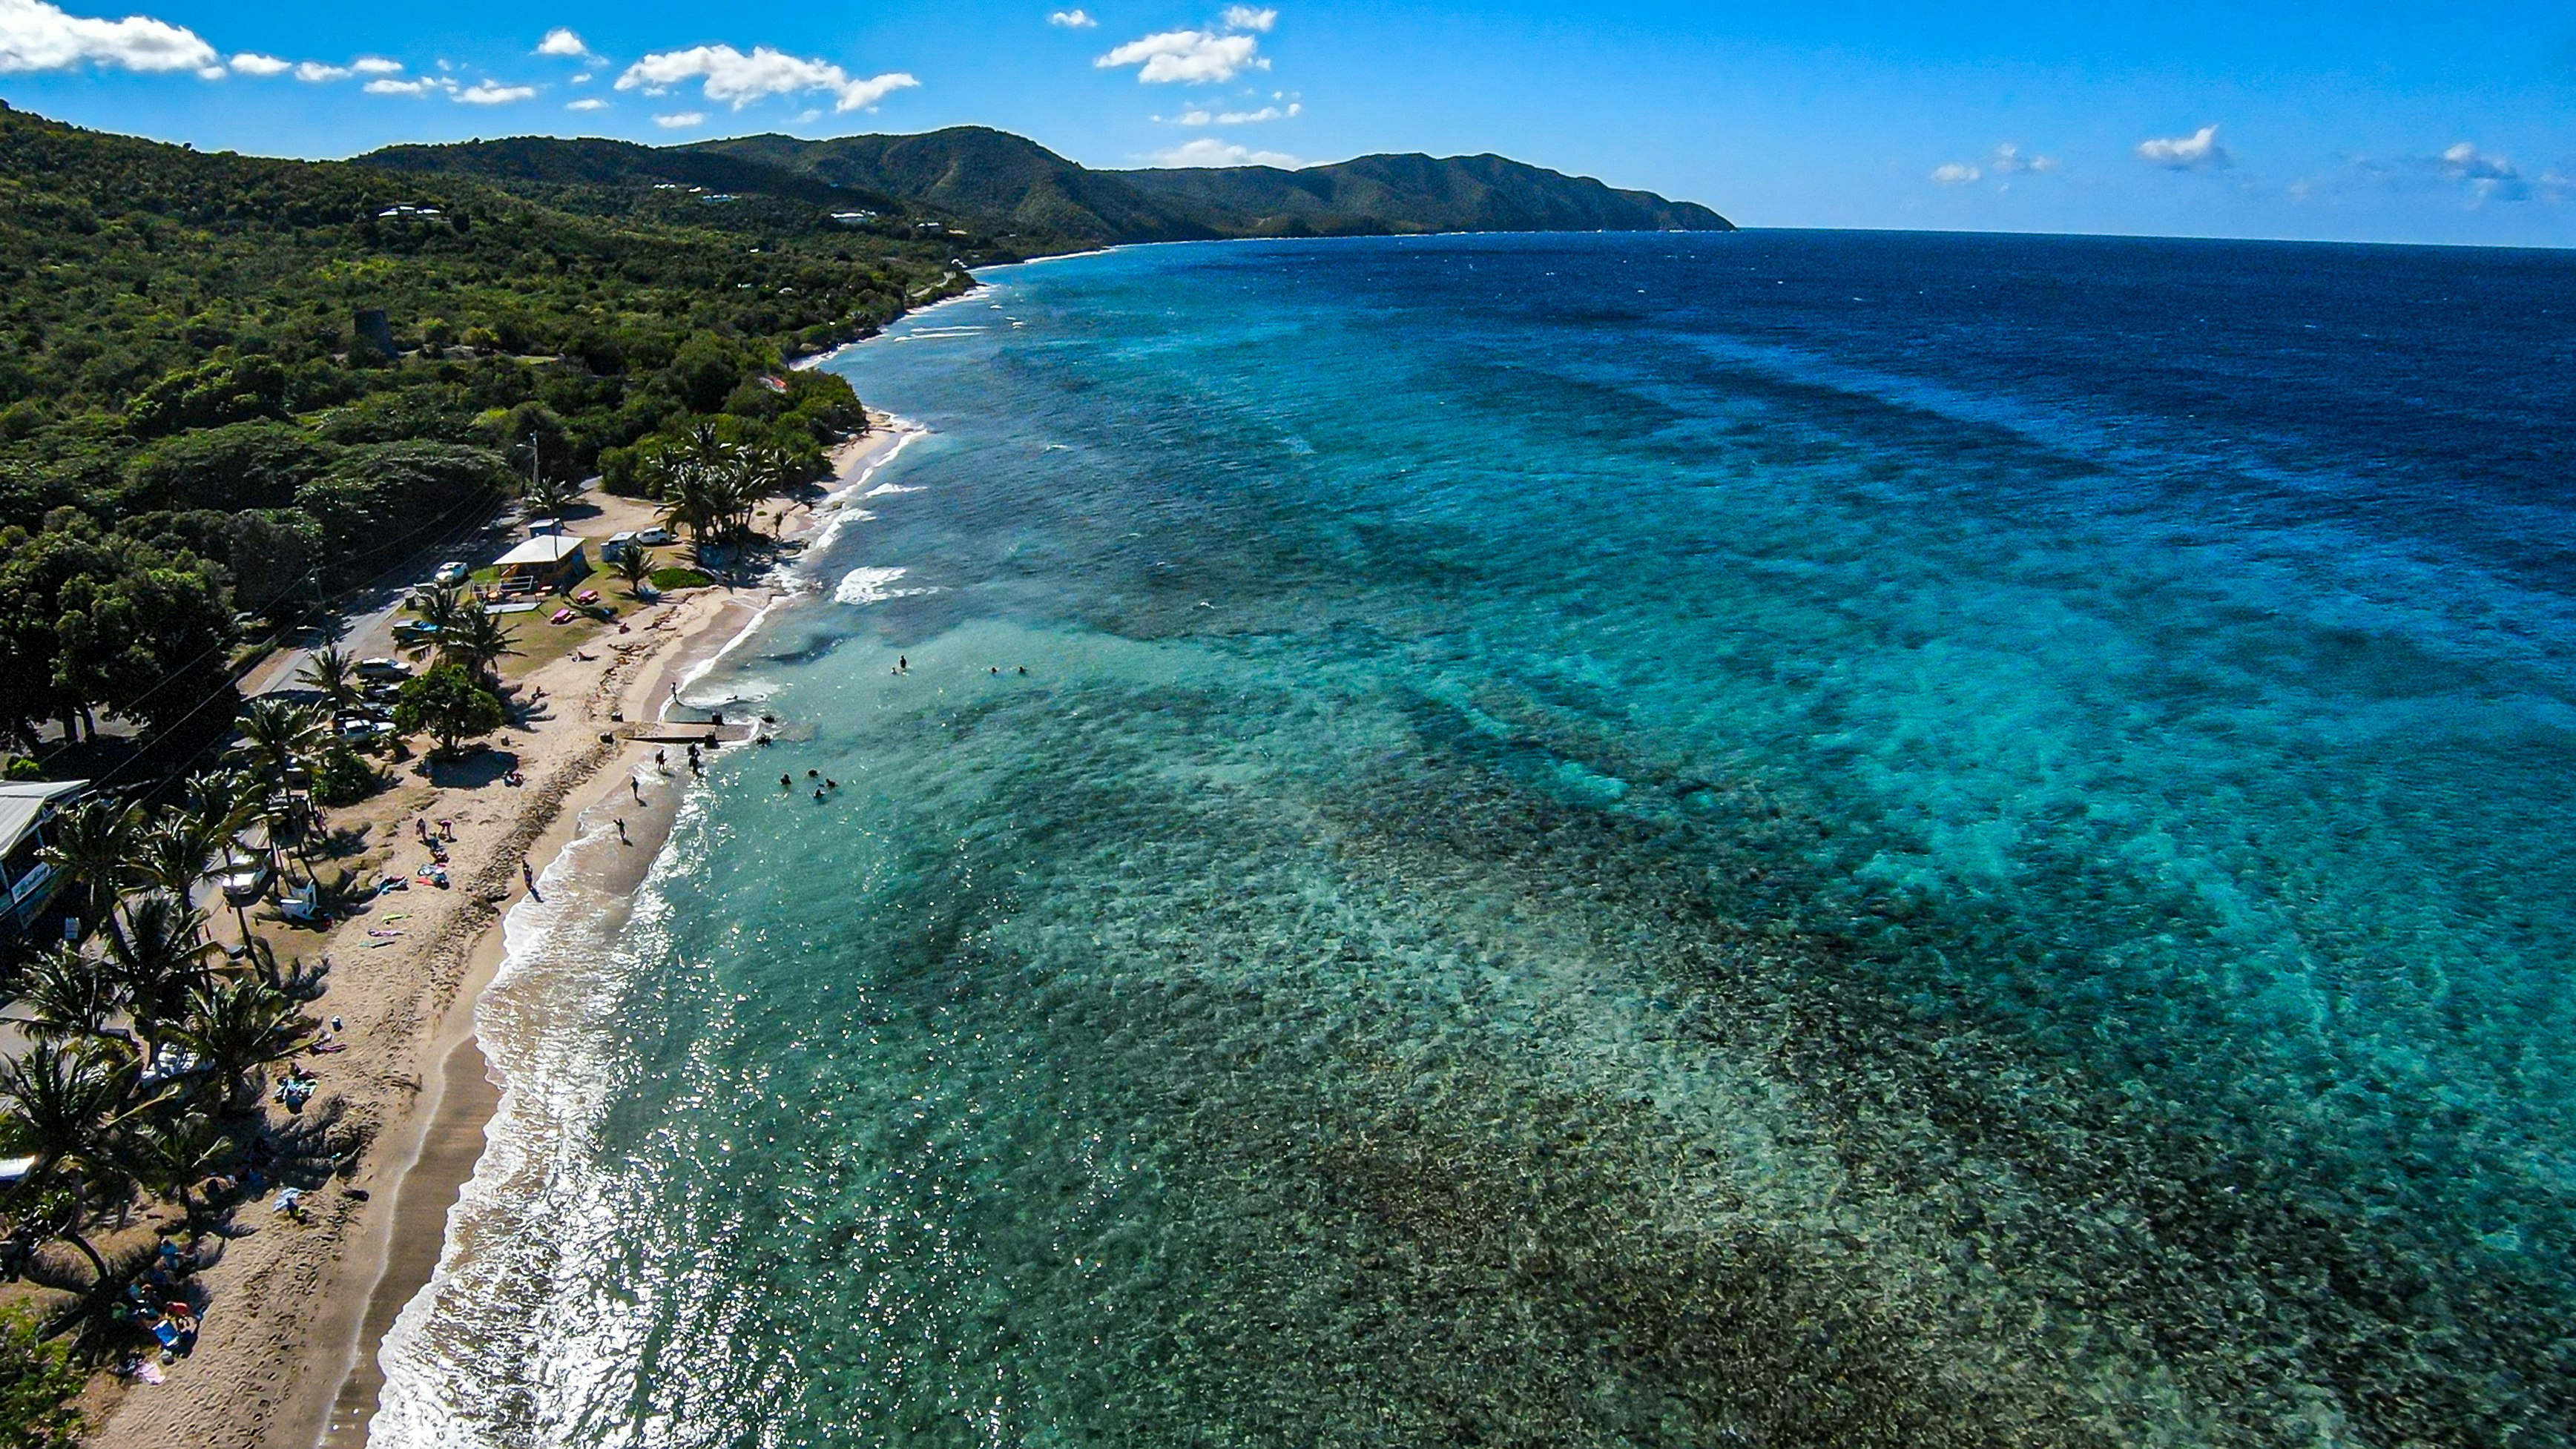 Aerial view of Cane Bay Beach, St. Croix, US Virgin Islands, with the coral reefs visible beneath the water